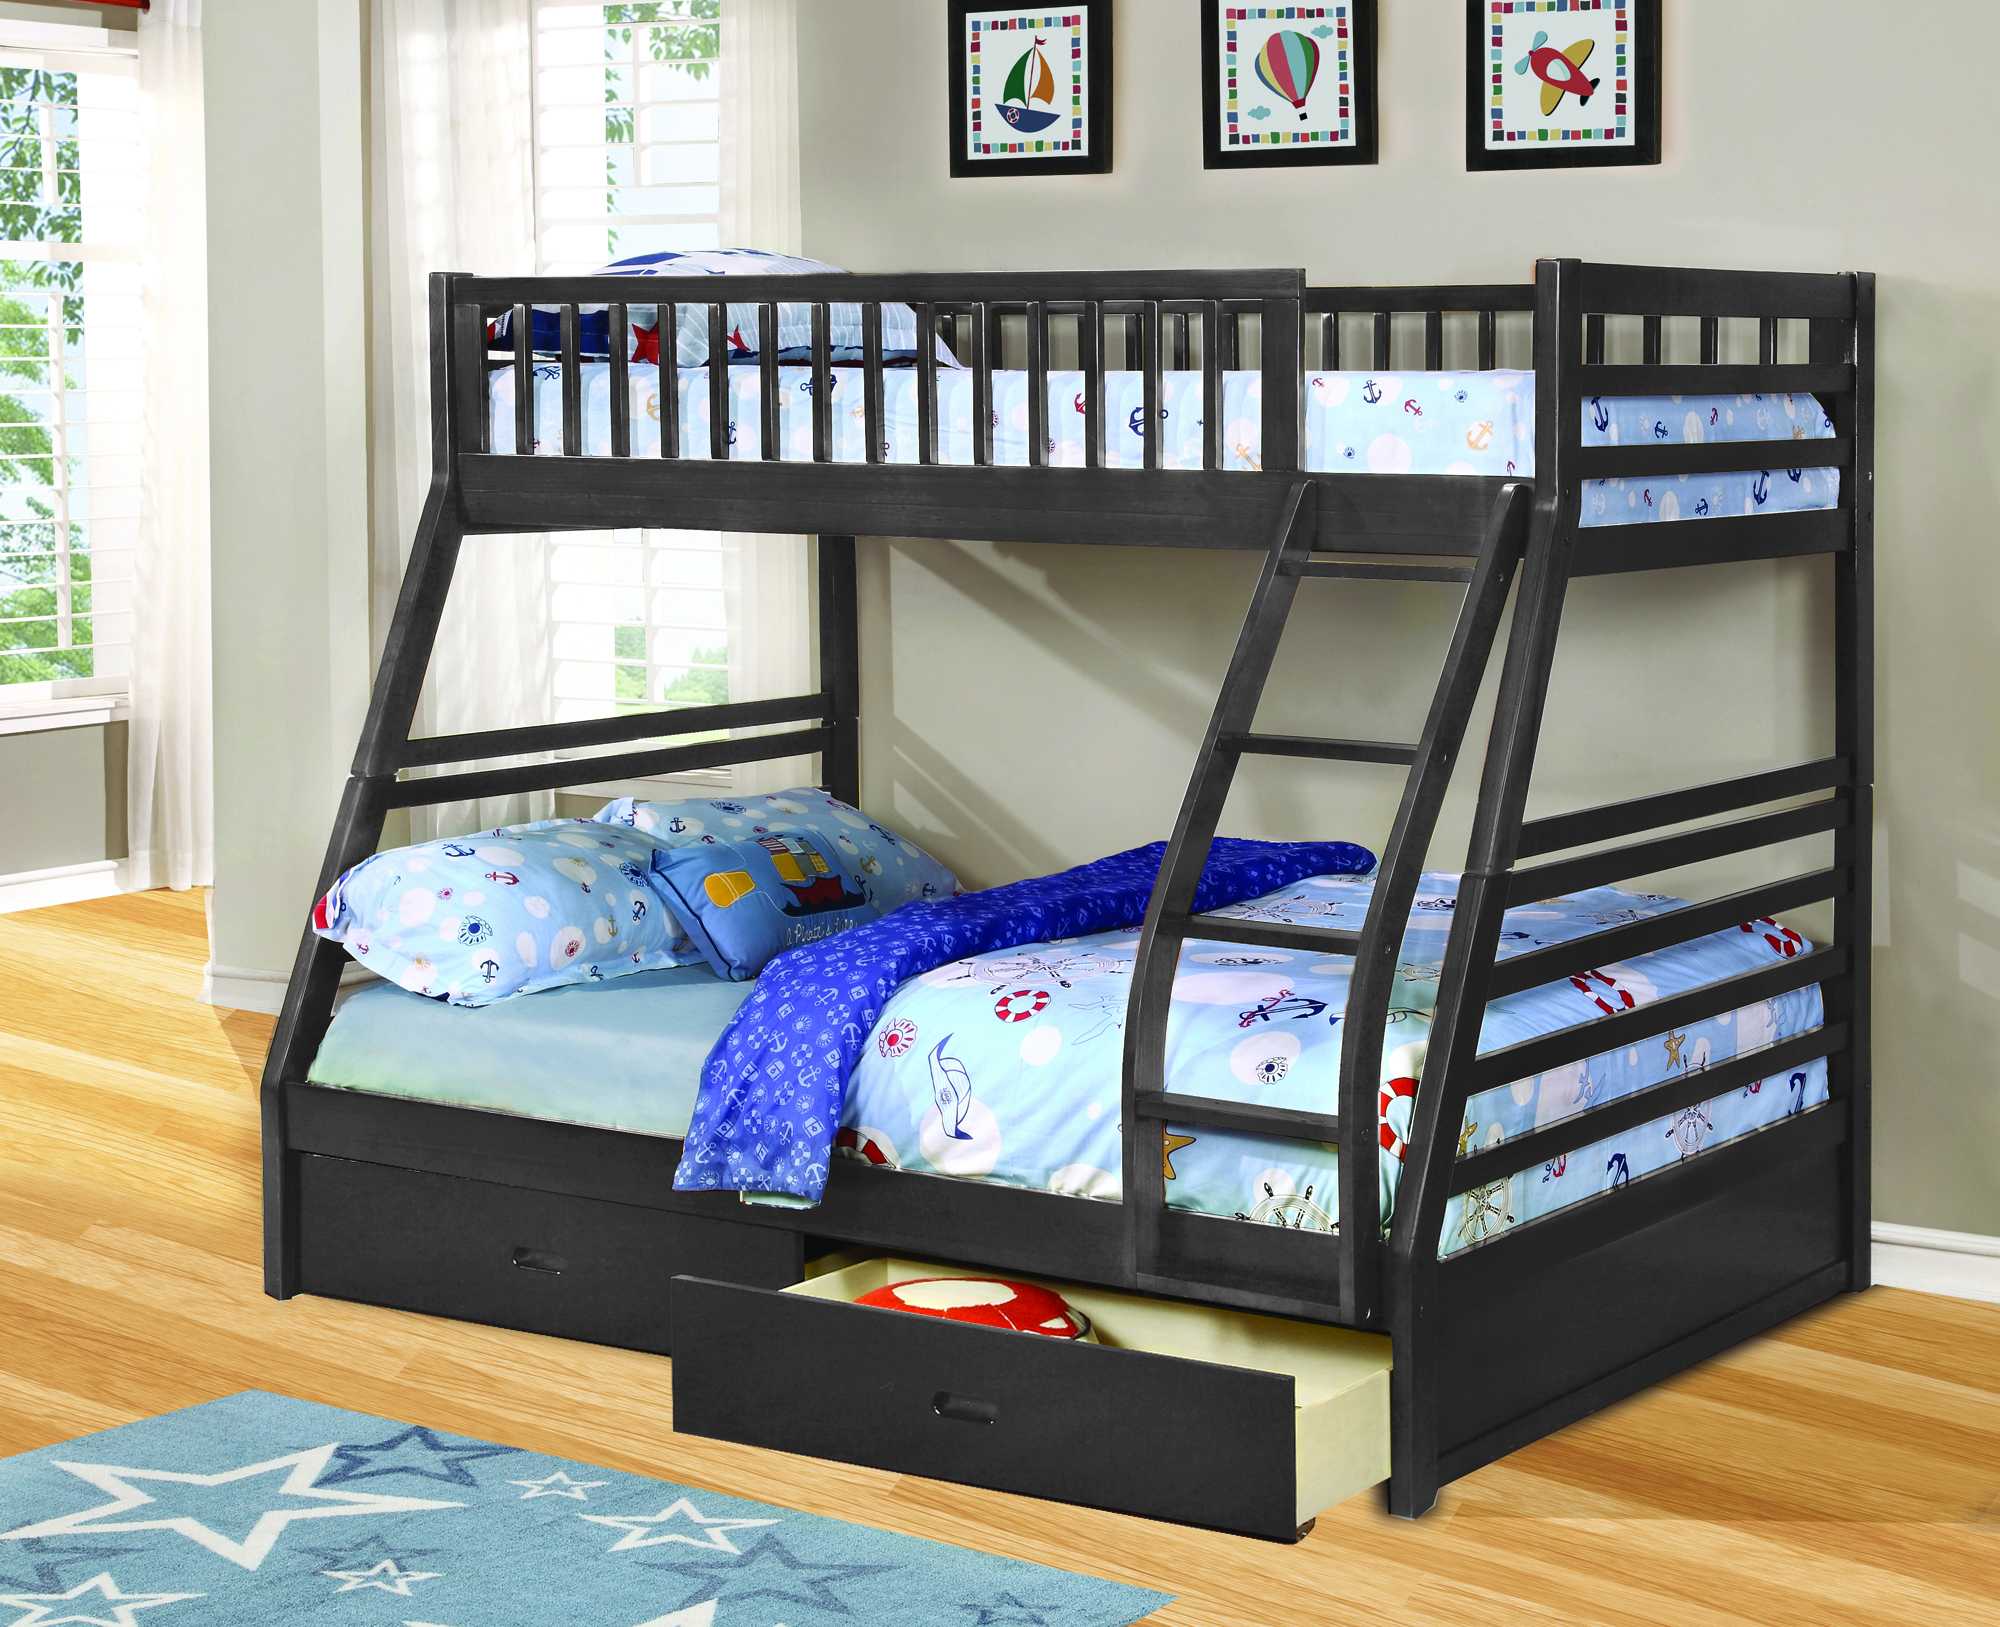 78.75" X 42.5-57.25" X 65" Grey Manufactured Wood and Solid Wood Twin or Full Bunk Bed with 2 Drawers